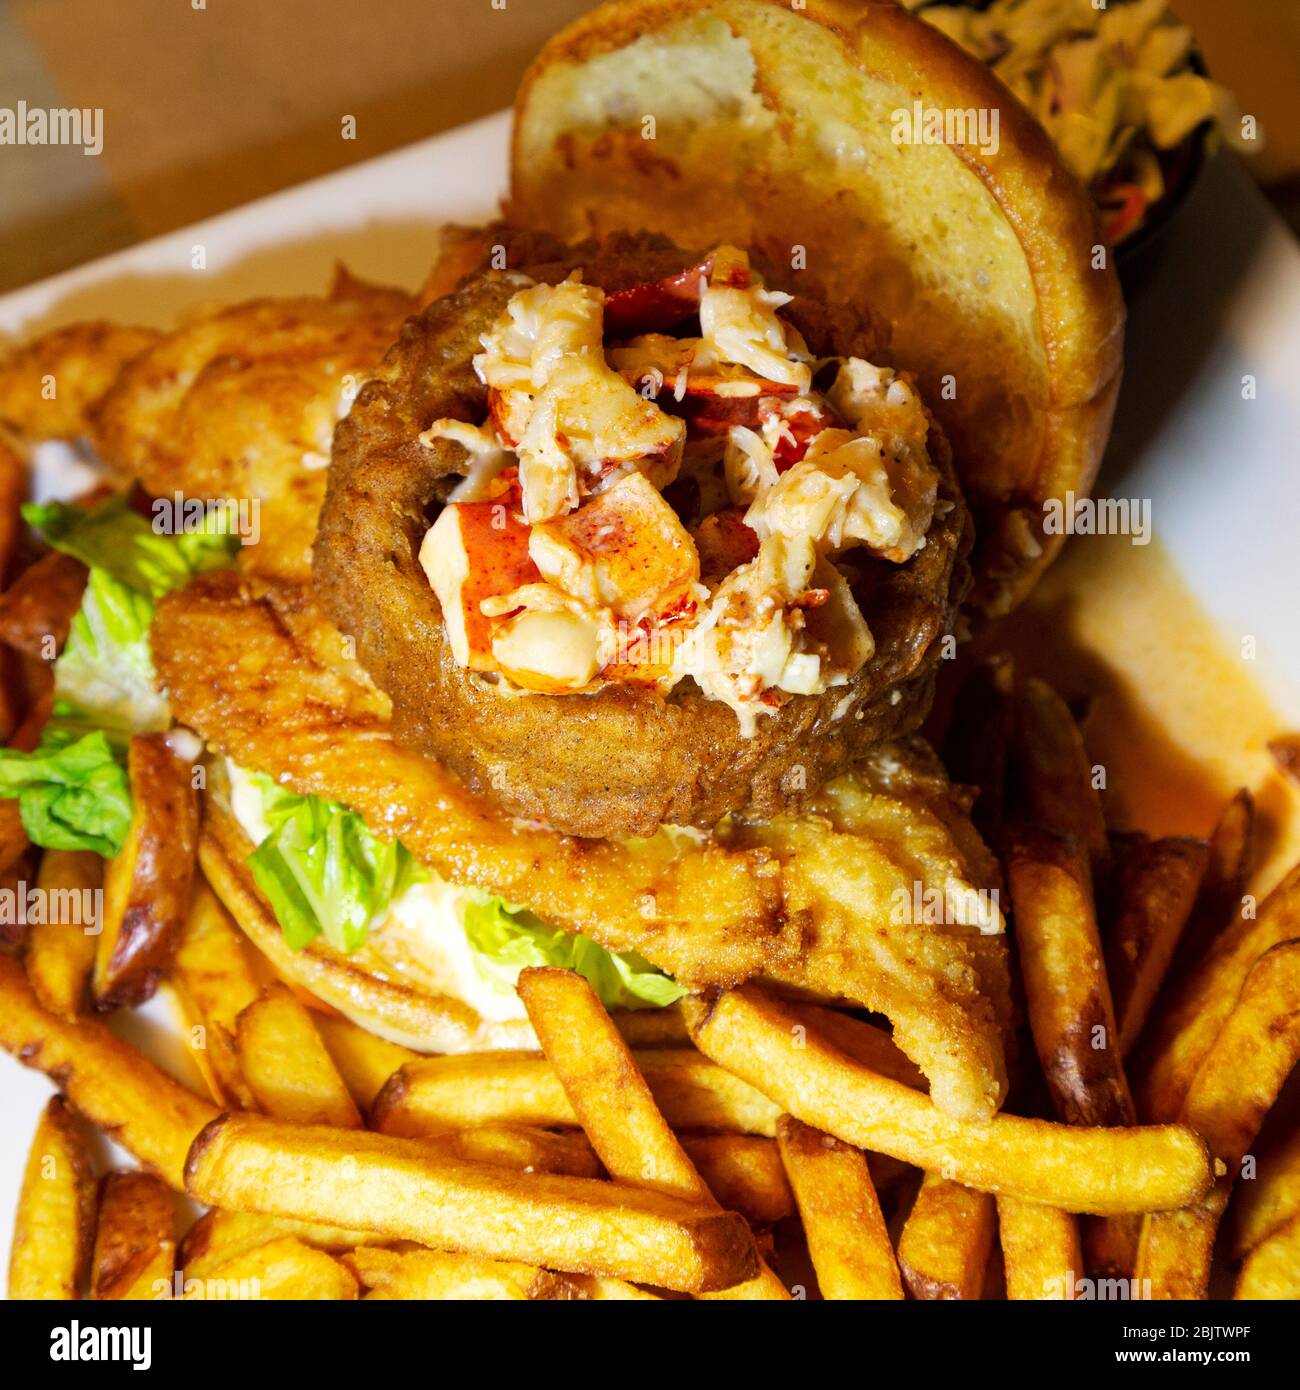 Fried haddock served with lobster meat, French fries and a bread bun in Barrington, Nova Scotia, Canada. Stock Photo